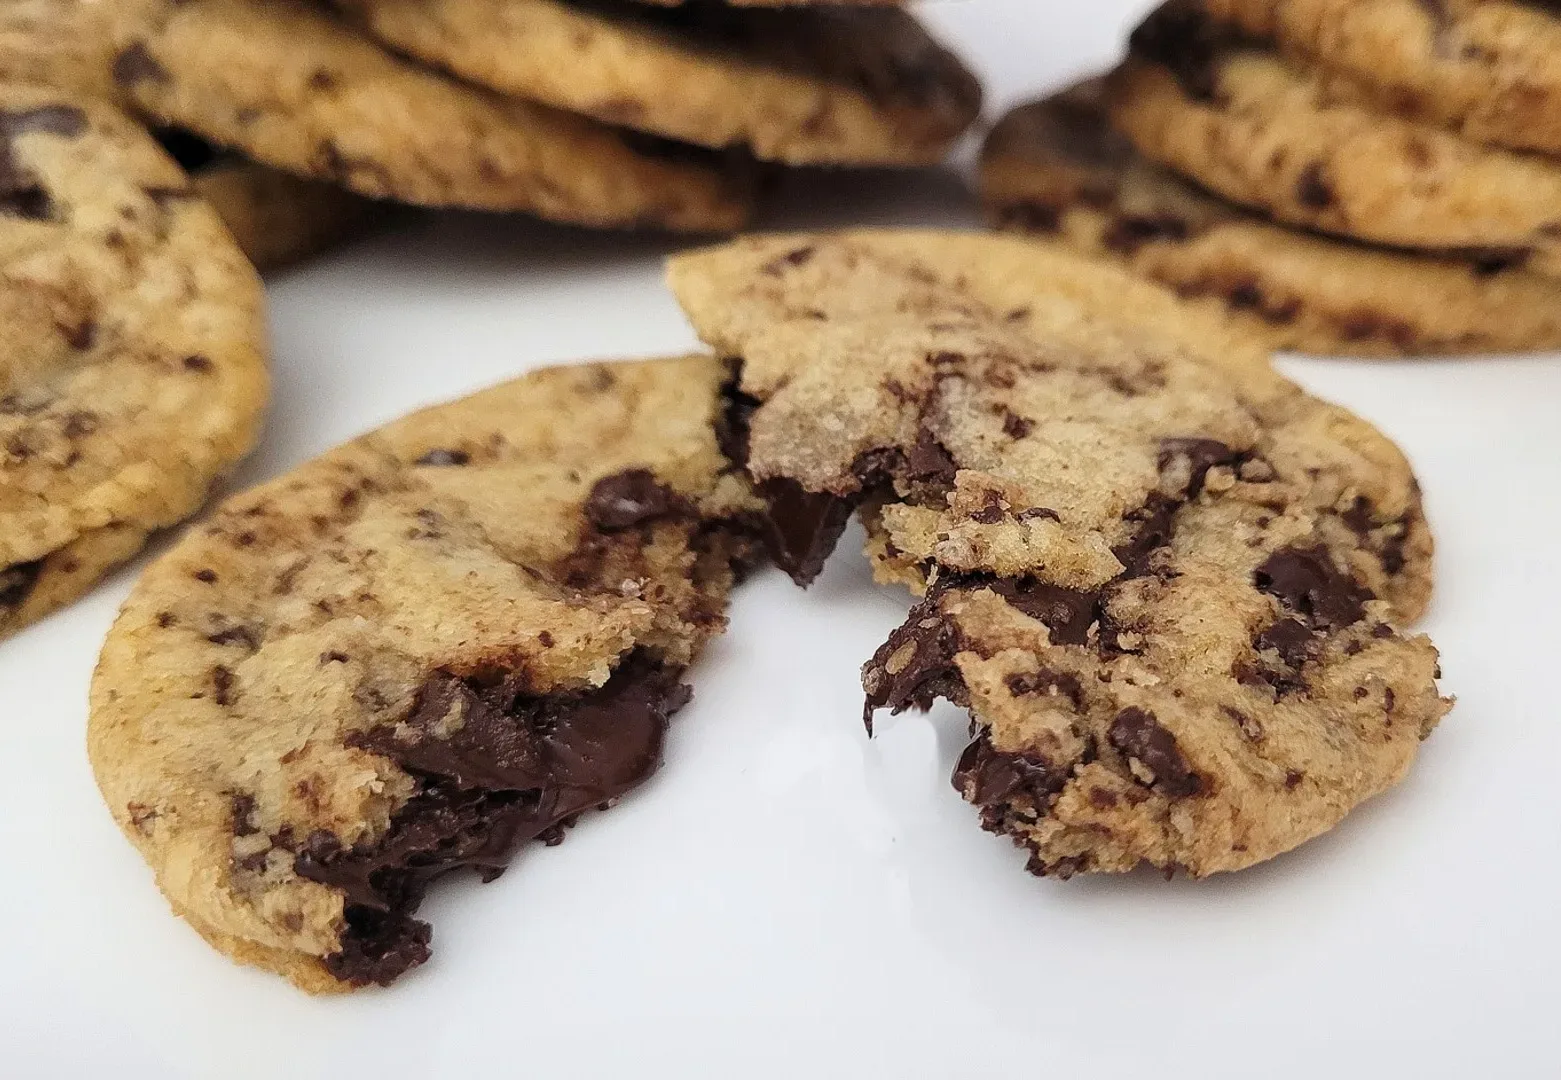 inside view of a warm GF chocolate chunk cookie with more cookies in the background